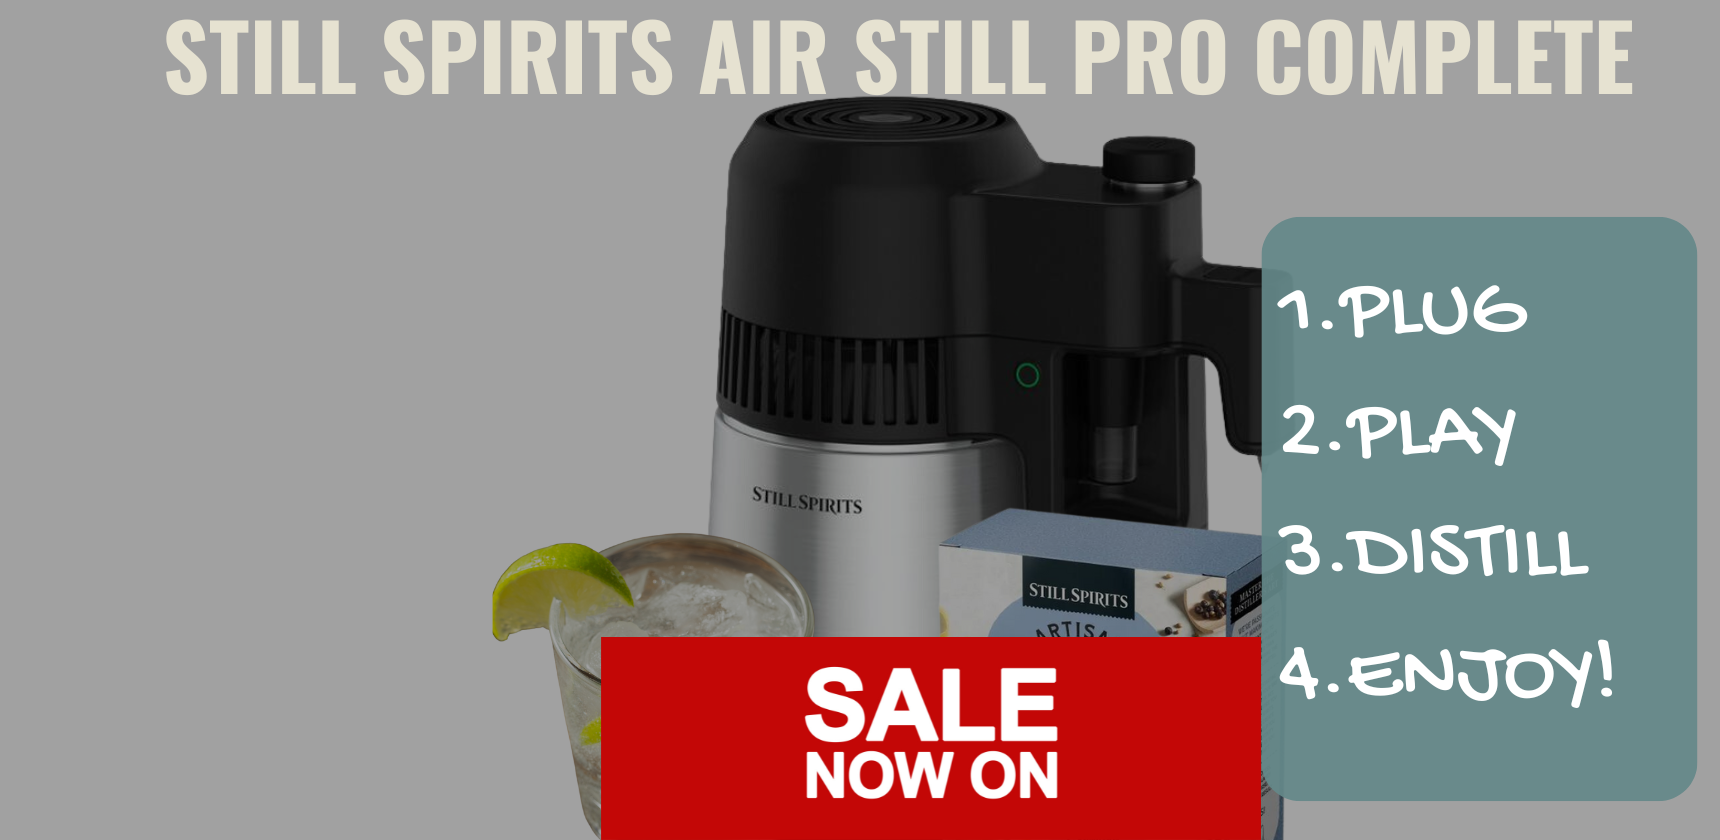 DISCOVER DISTILLATION WITH THE AIR STILL PRO